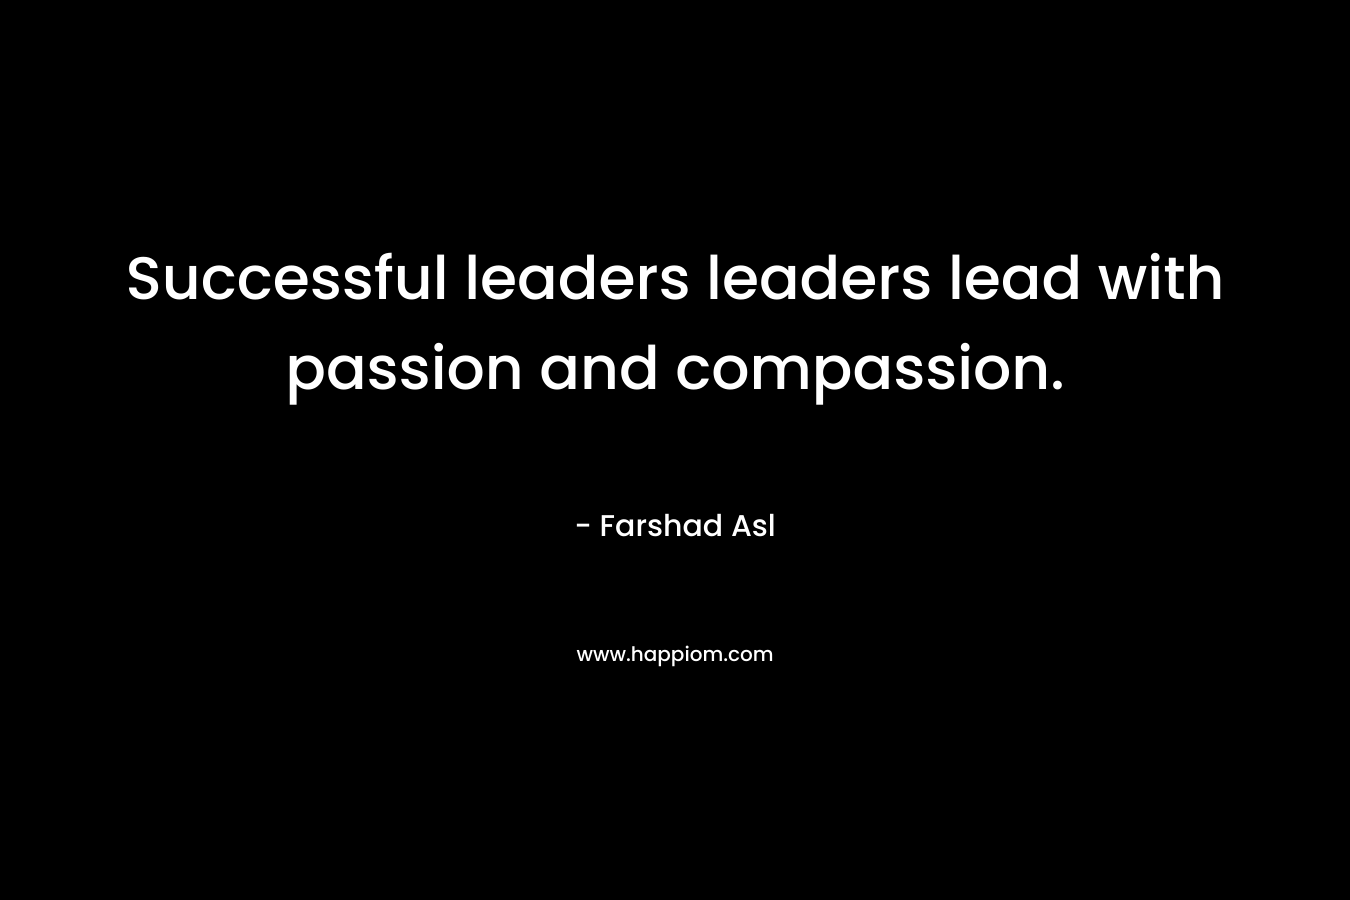 Successful leaders leaders lead with passion and compassion.